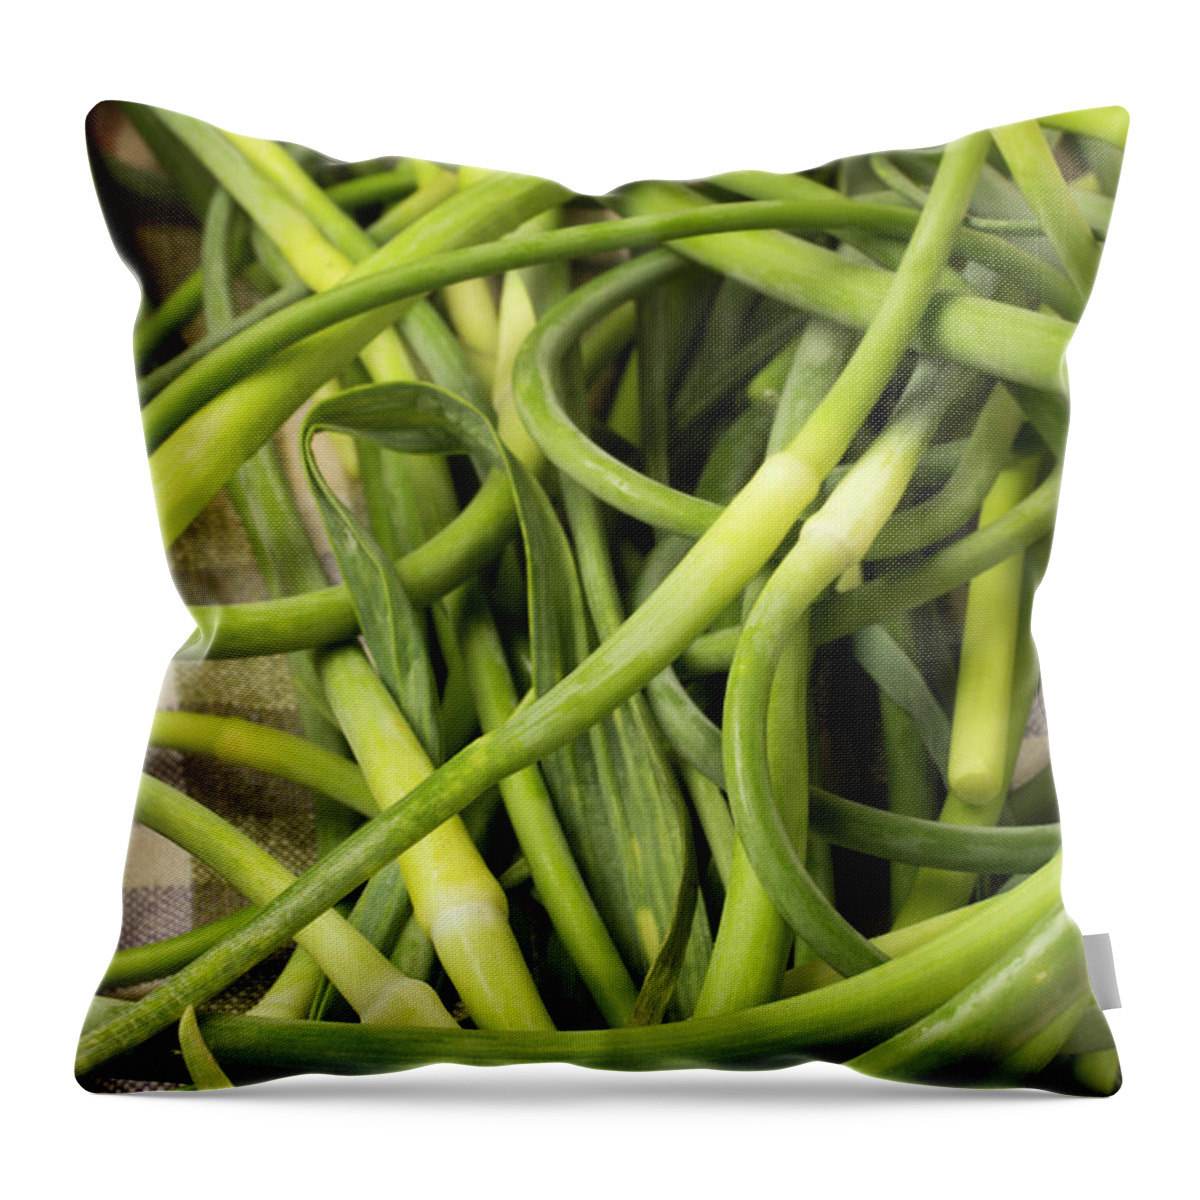 Season Throw Pillow featuring the photograph Raw Garlic Scapes by Brian Yarvin